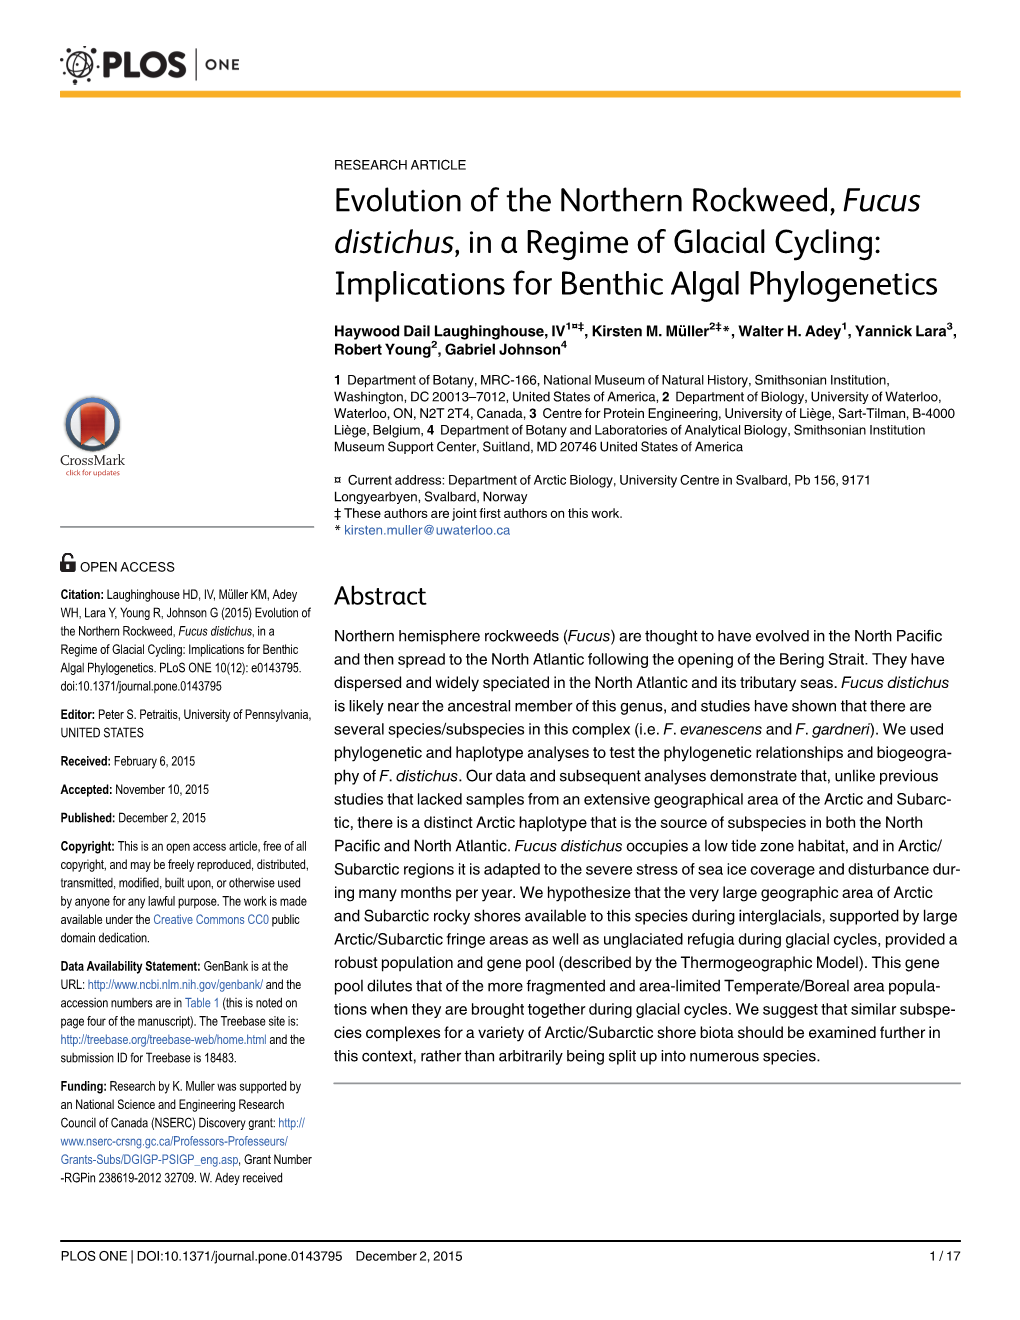 Evolution of the Northern Rockweed, Fucus Distichus, in a Regime of Glacial Cycling: Implications for Benthic Algal Phylogenetics